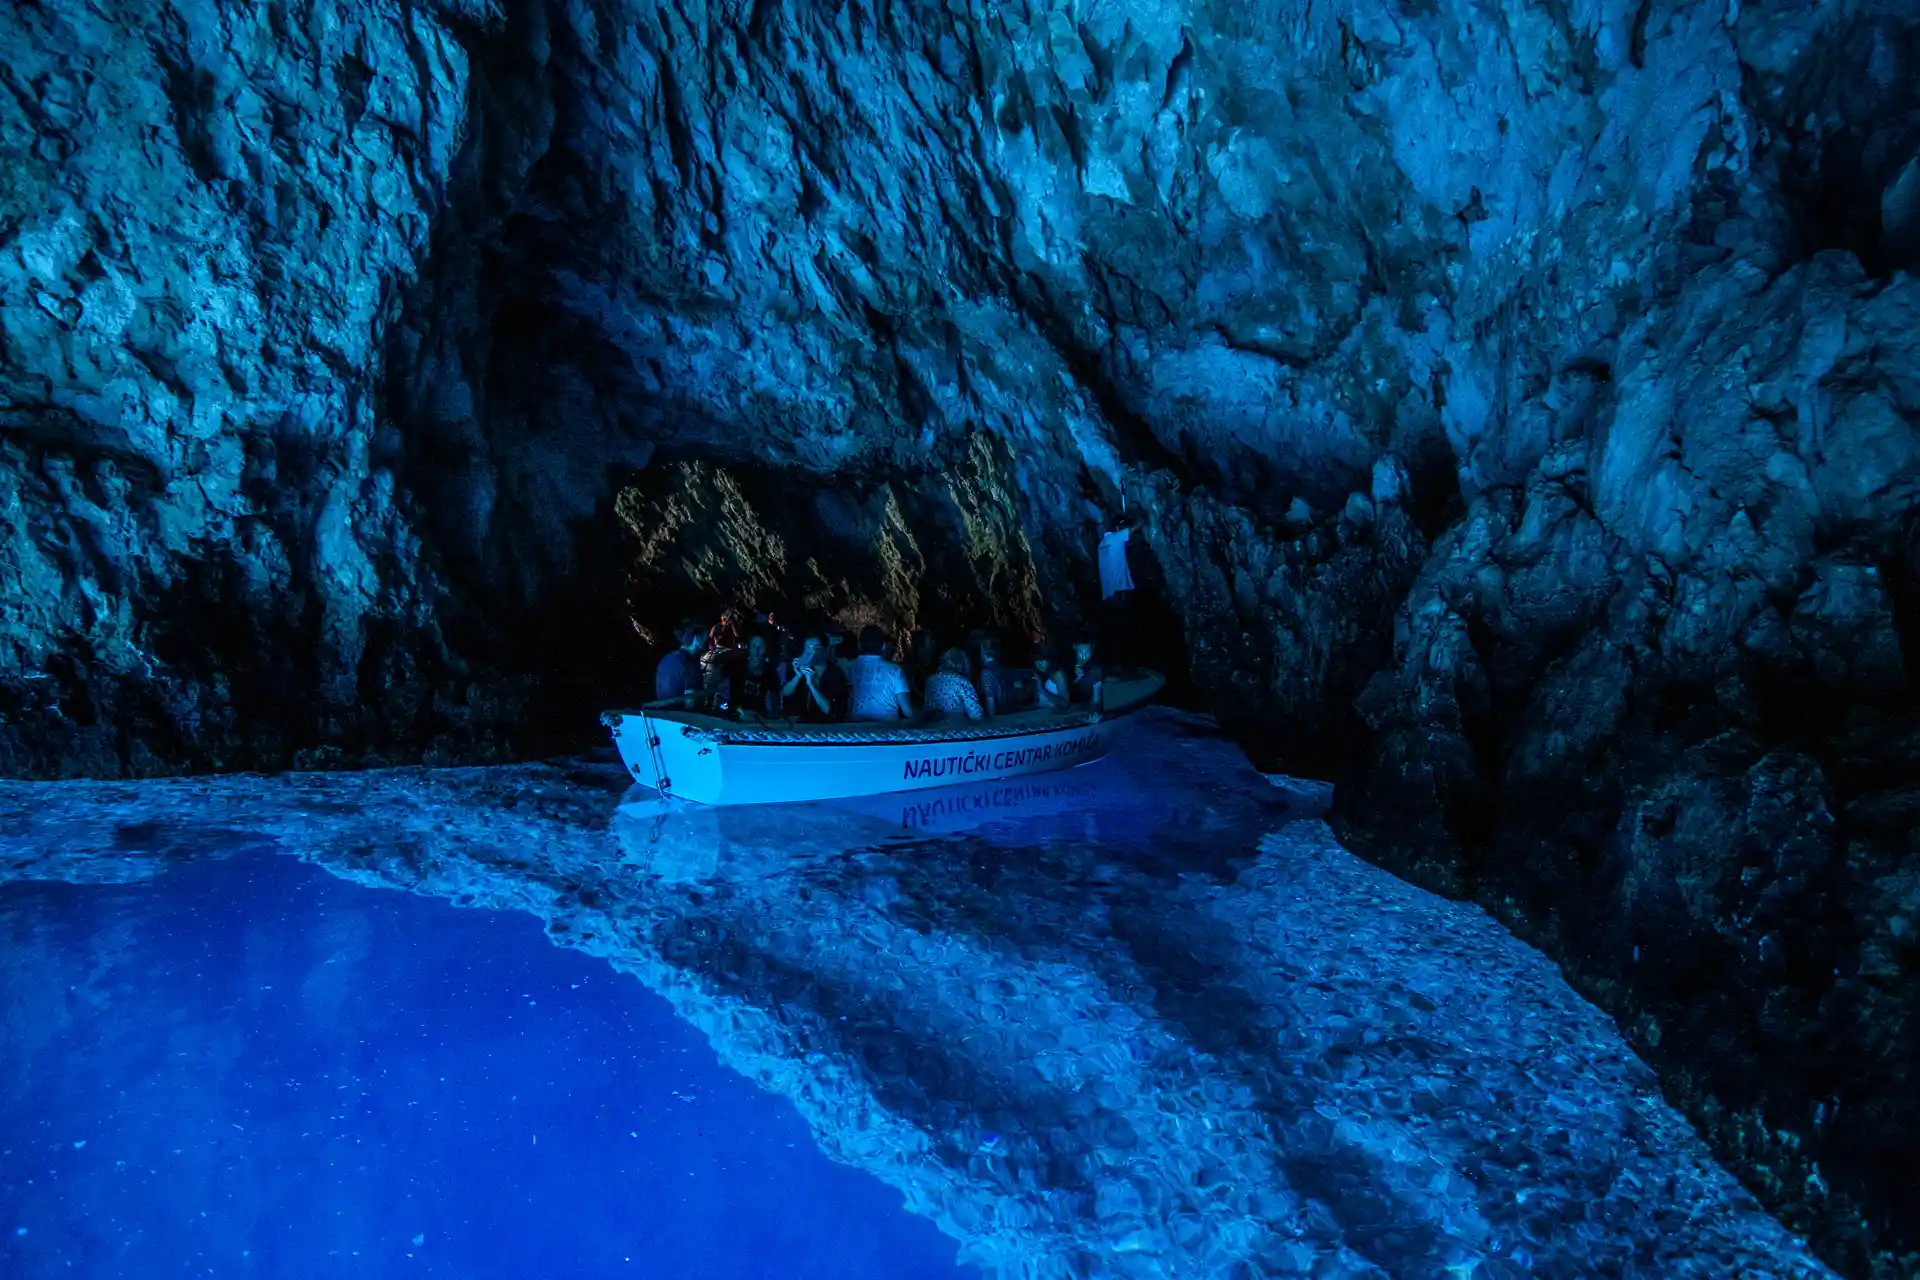 Tour of the stunning Blue Cave